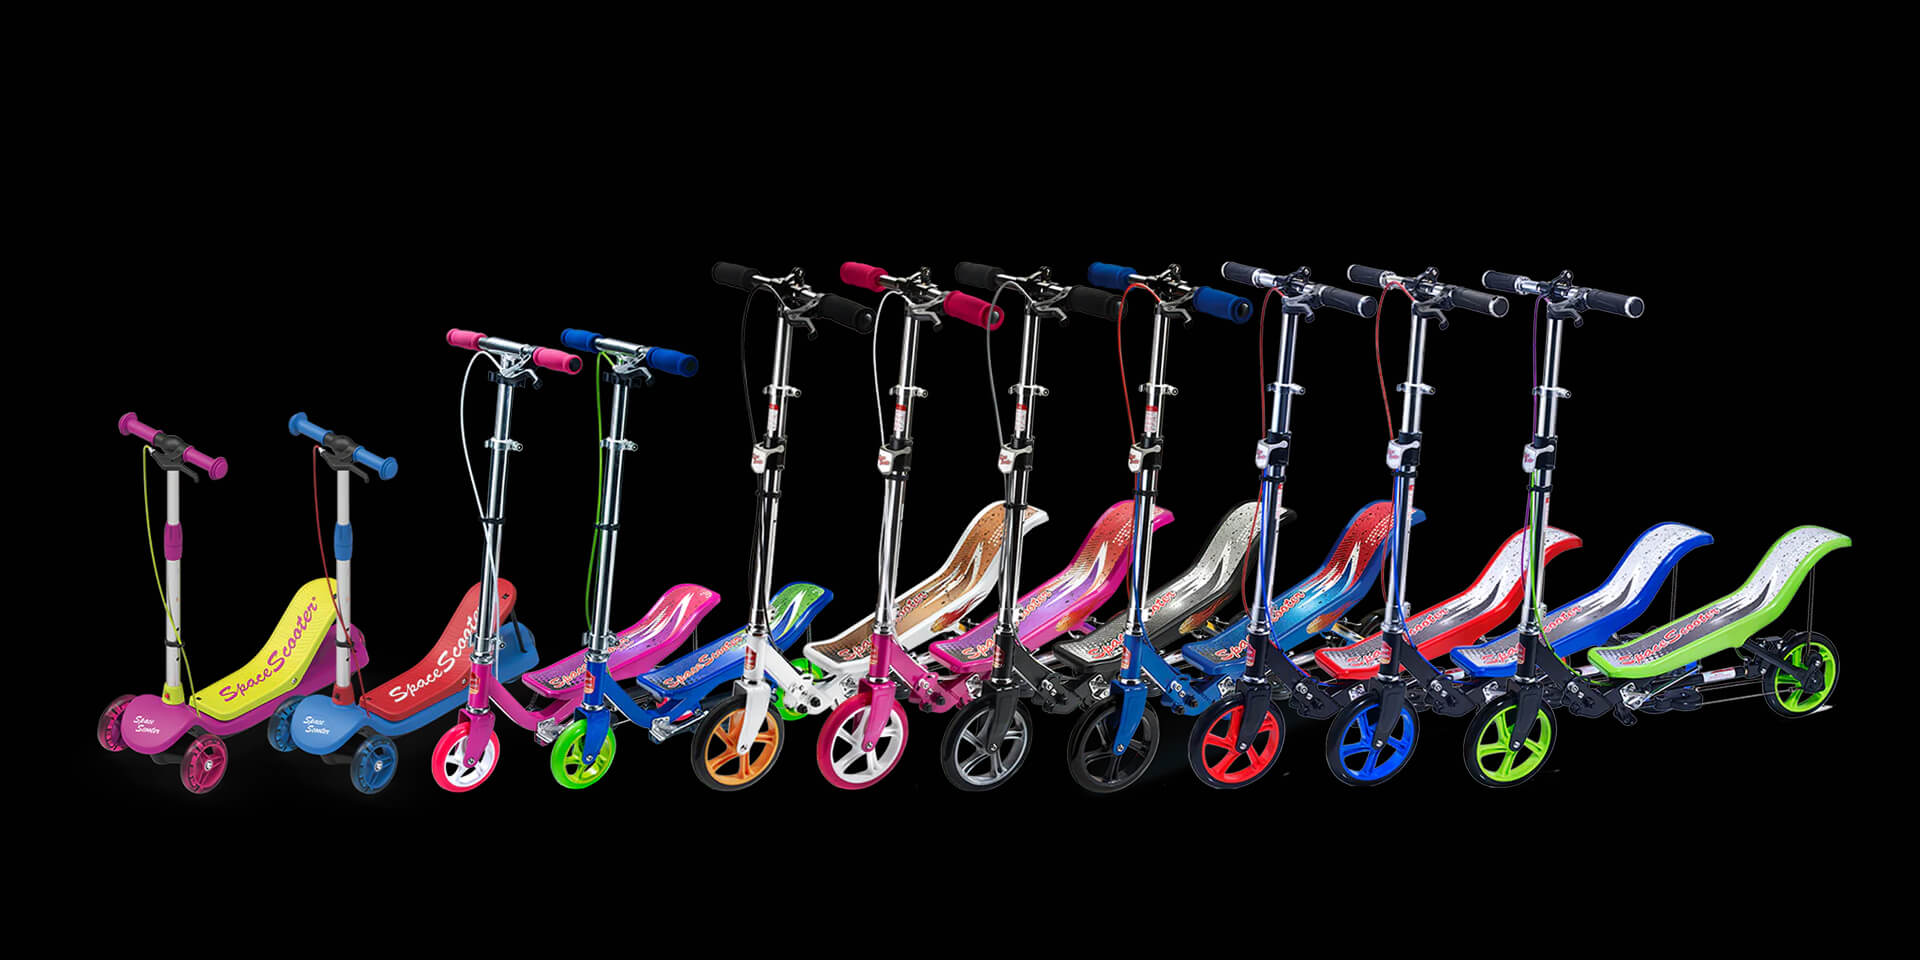 Refurbished Space Scooters